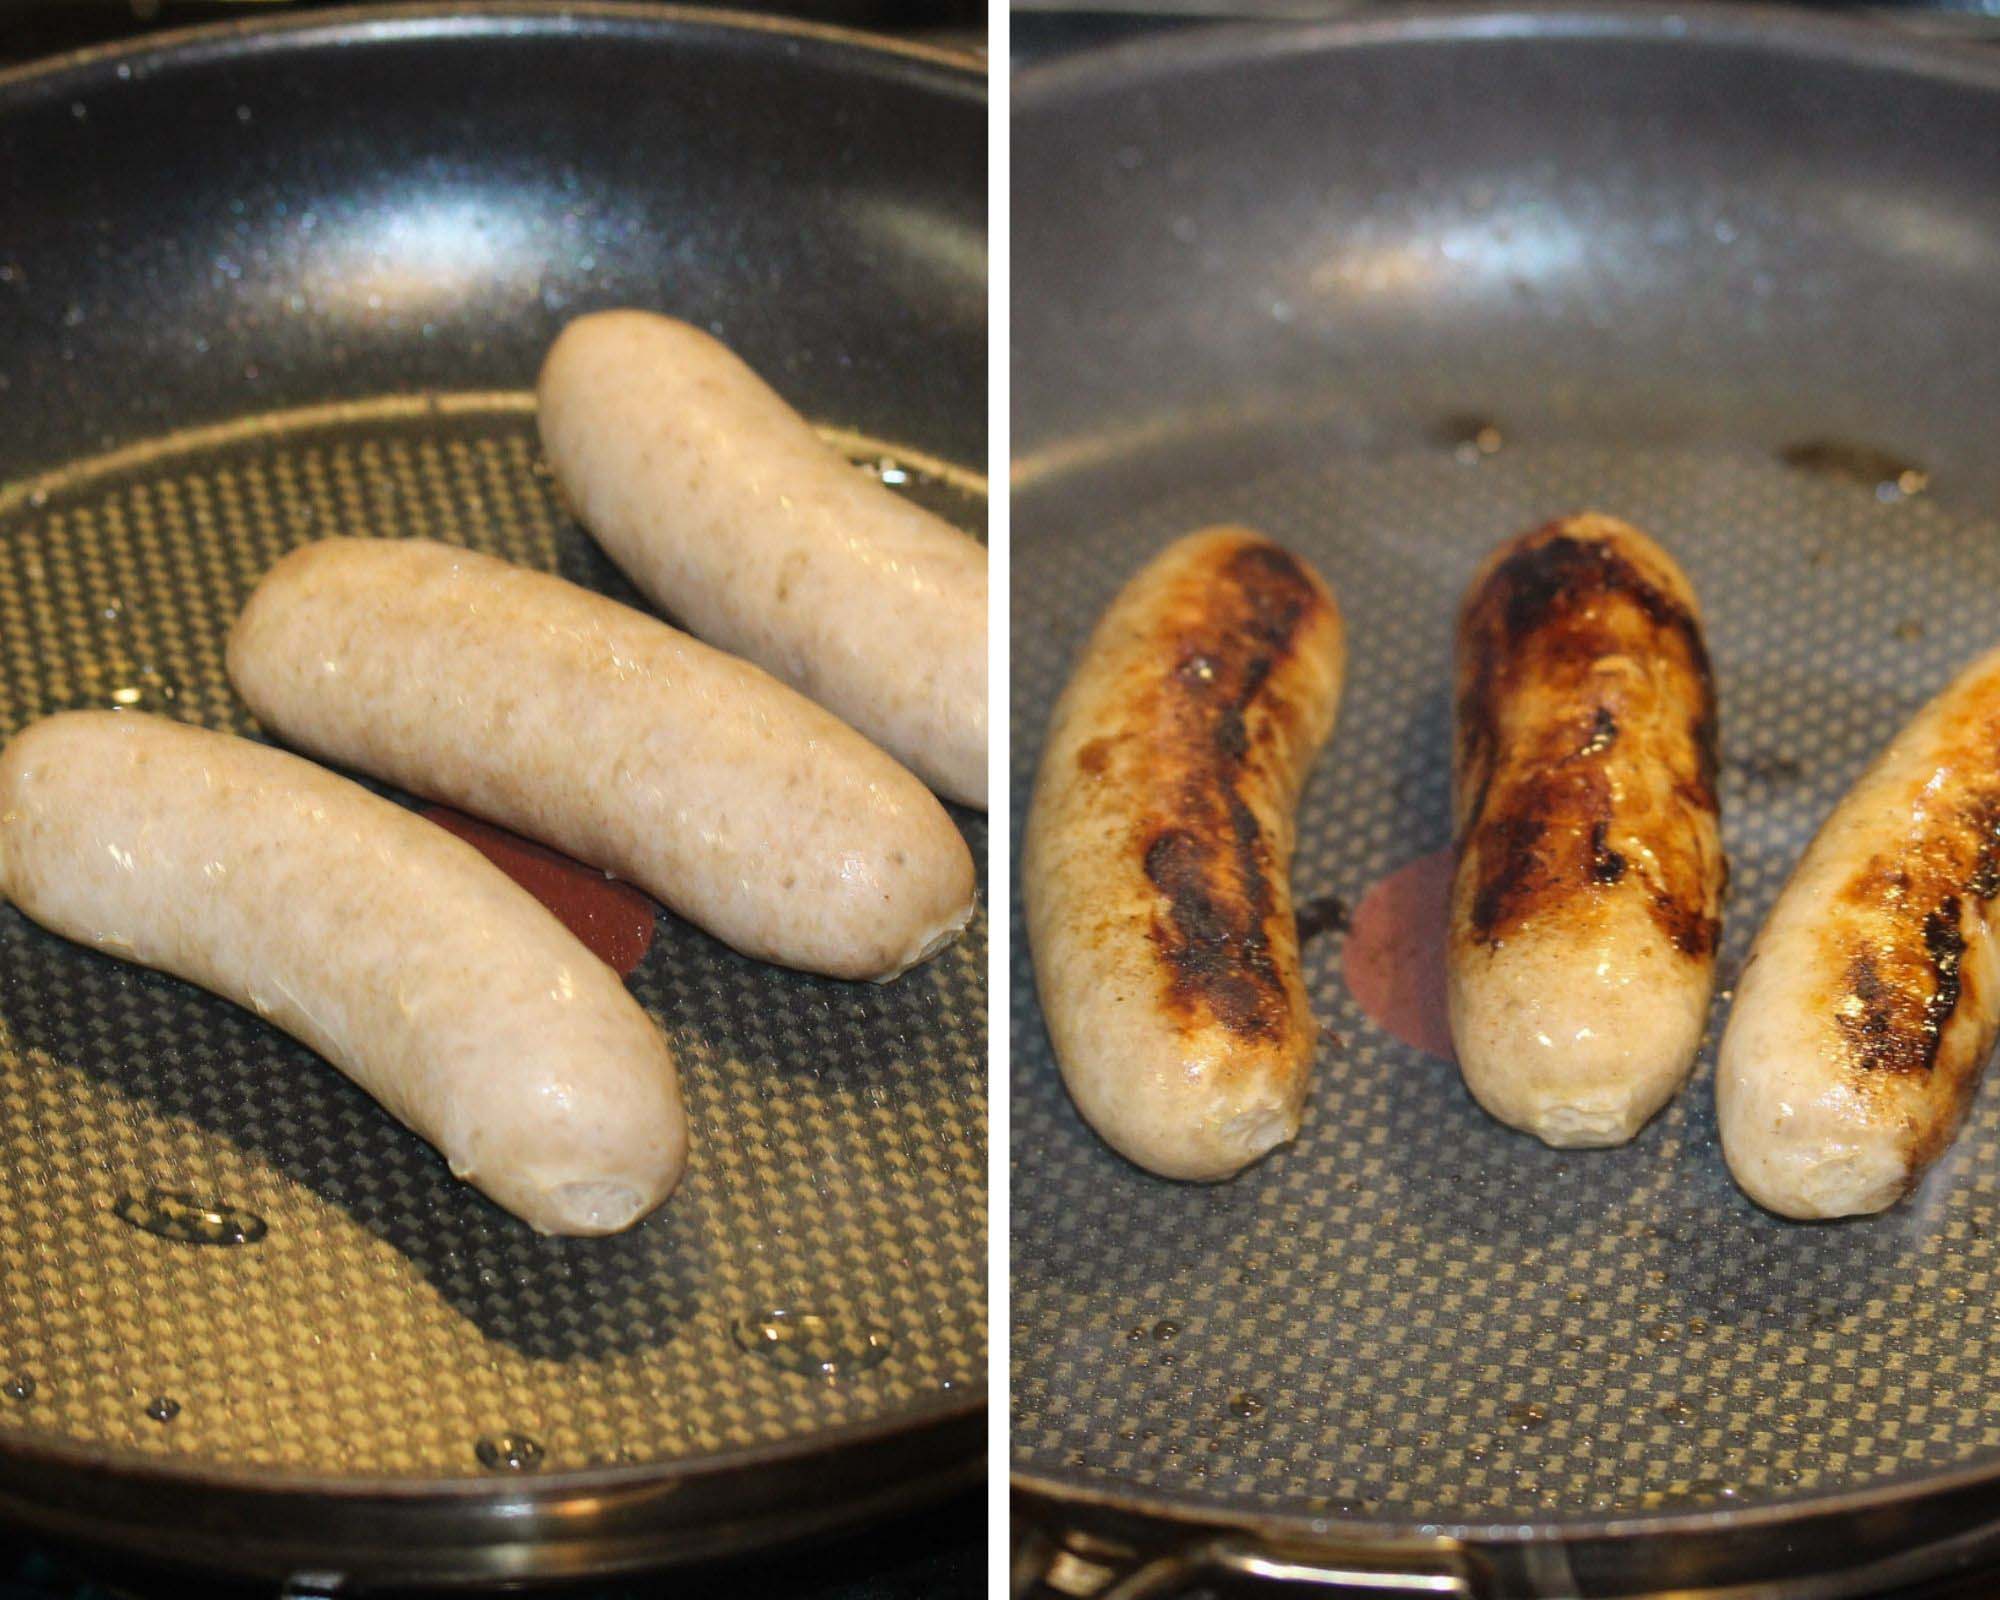 frying bratwurst in a pan before and after cooking.